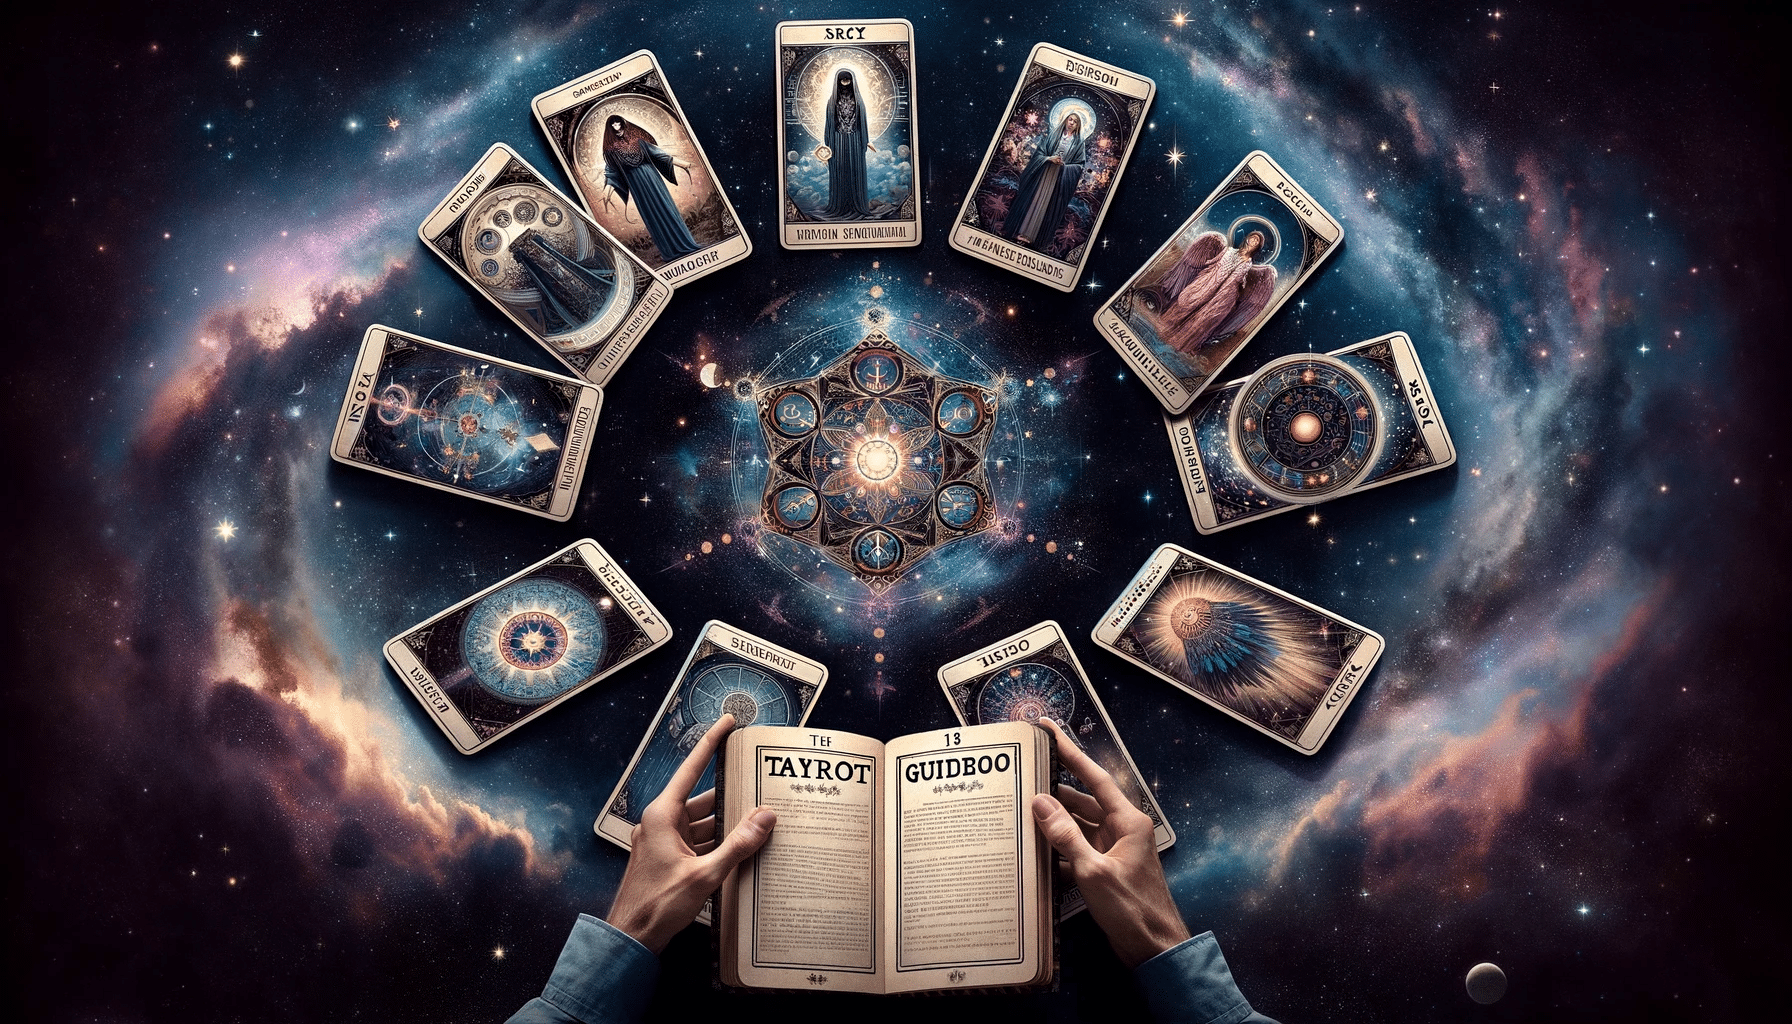 Eight tarot cards with unique designs are circled around hands holding the best tarot card interpretation guide, set against a star-filled mystical backdrop.